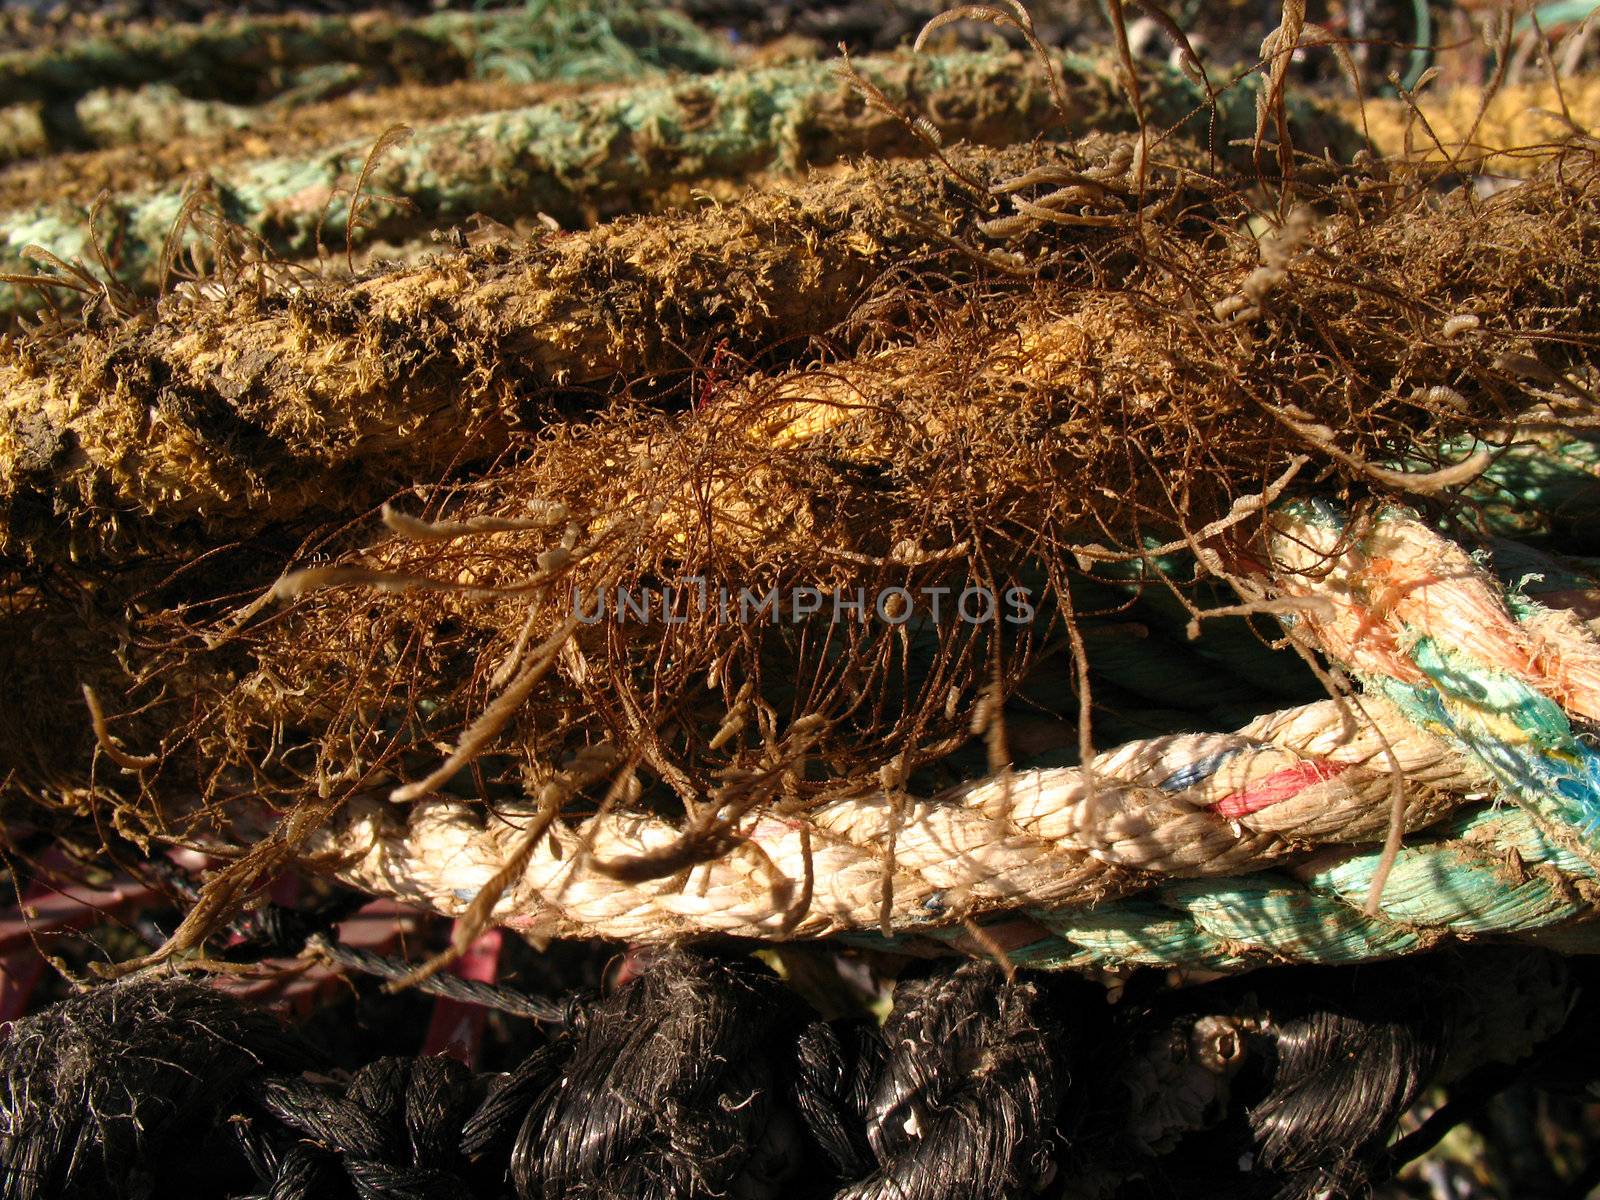 Ropes on lobster pots by tommroch